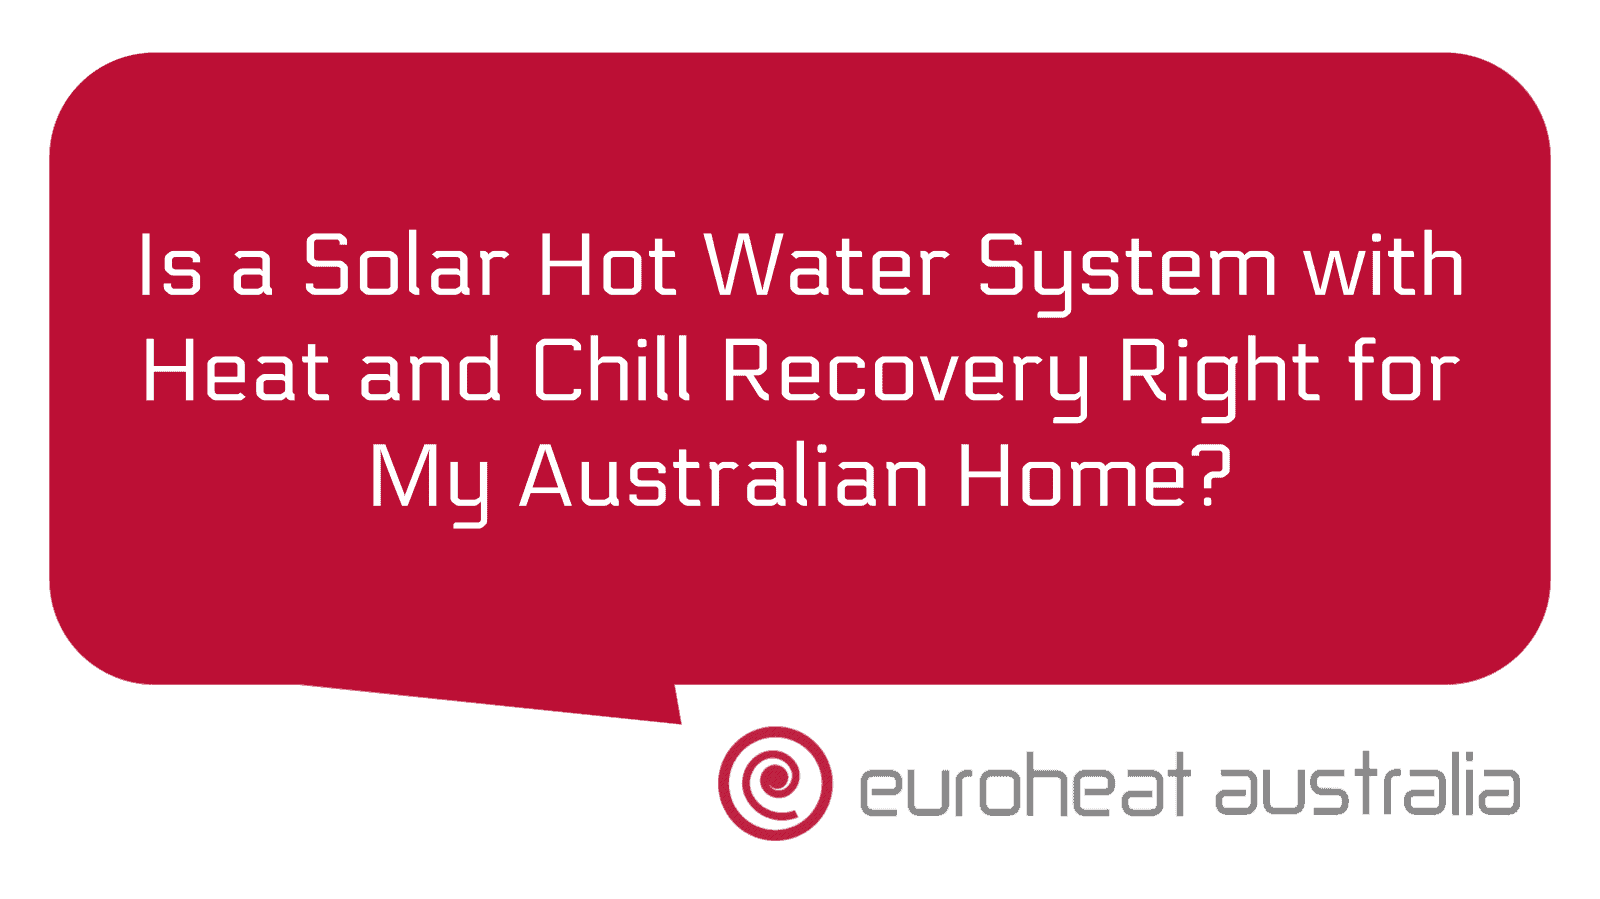 is-a-solar-hot-water-system-with-heat-and-chill-recovery-right-for-my